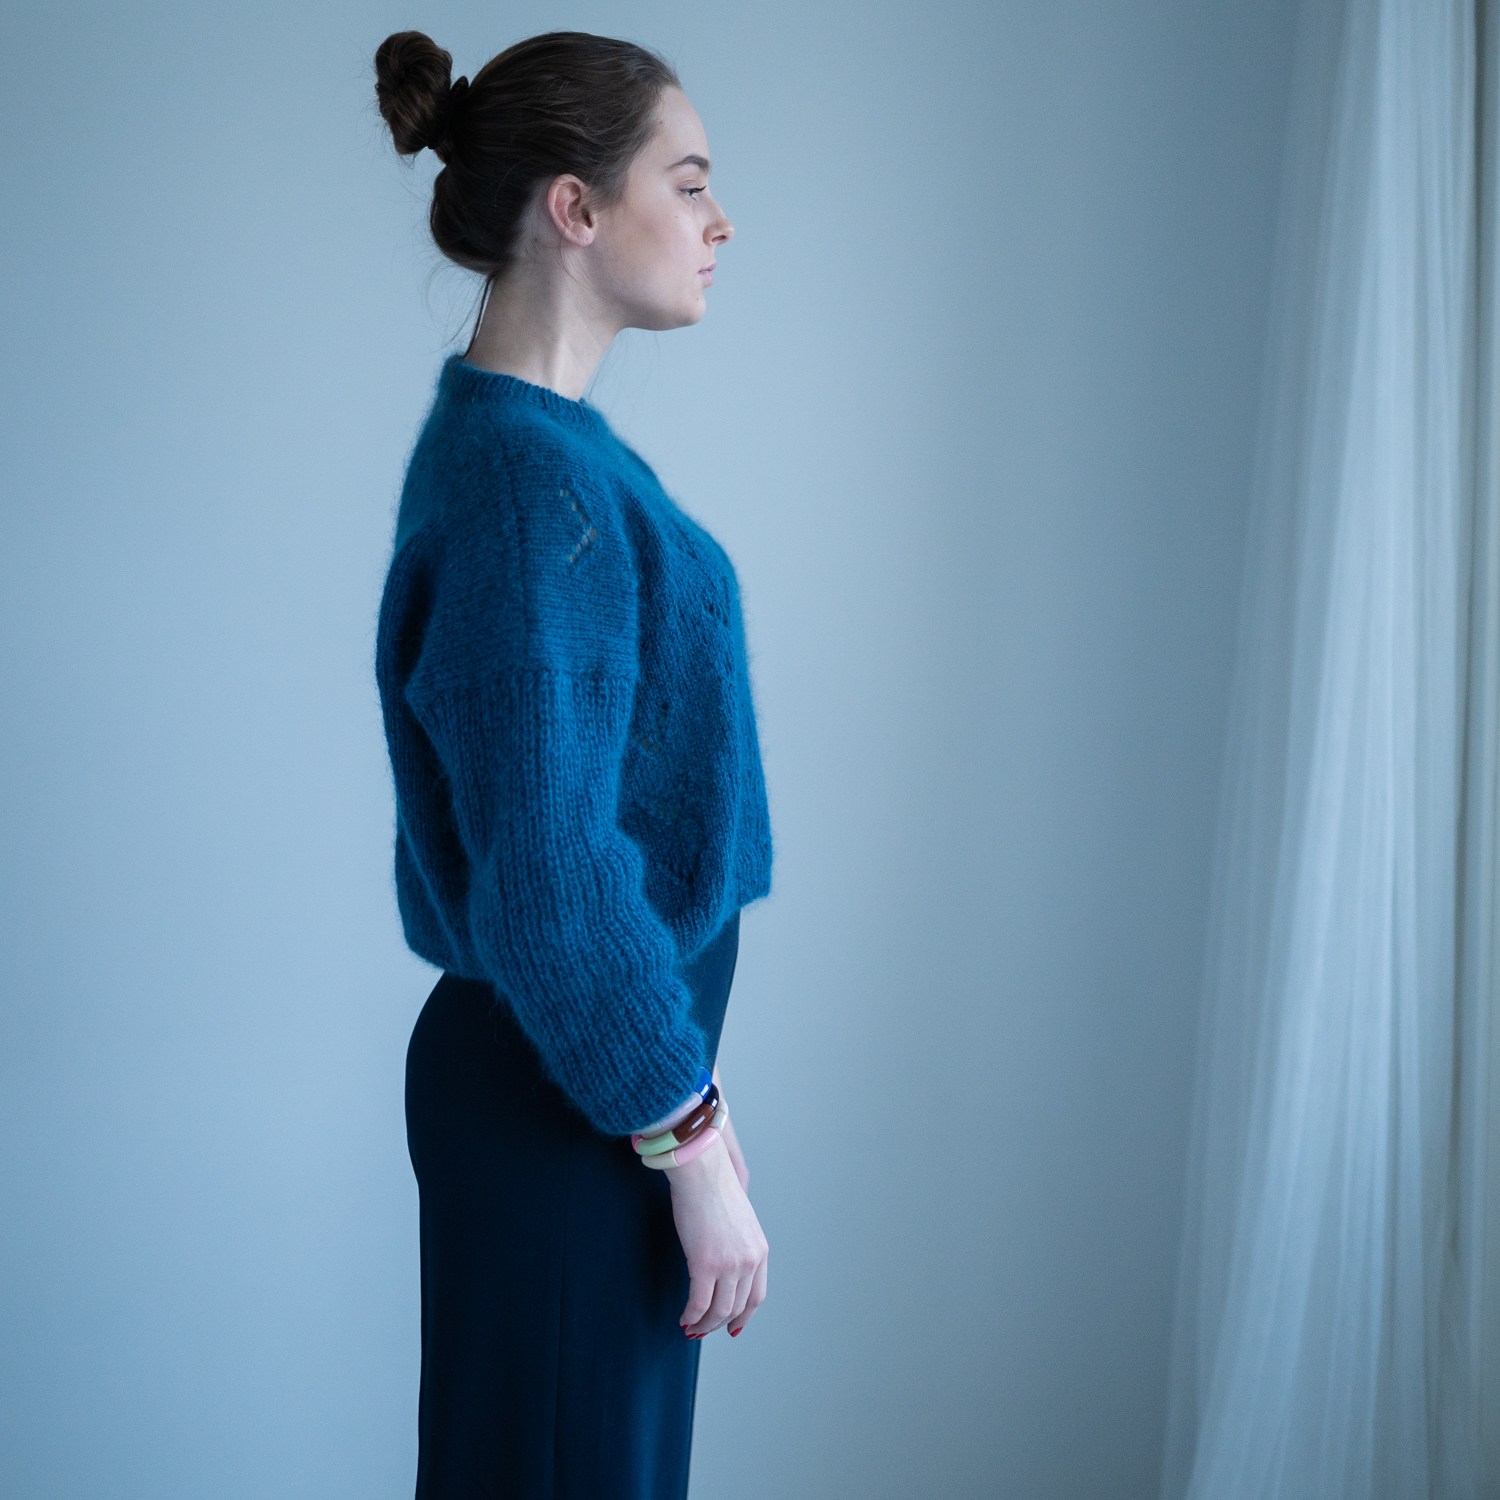  - Bloom Mohair Sweater | Womens knitted sweater - by HipKnitShop - 06/01/2019